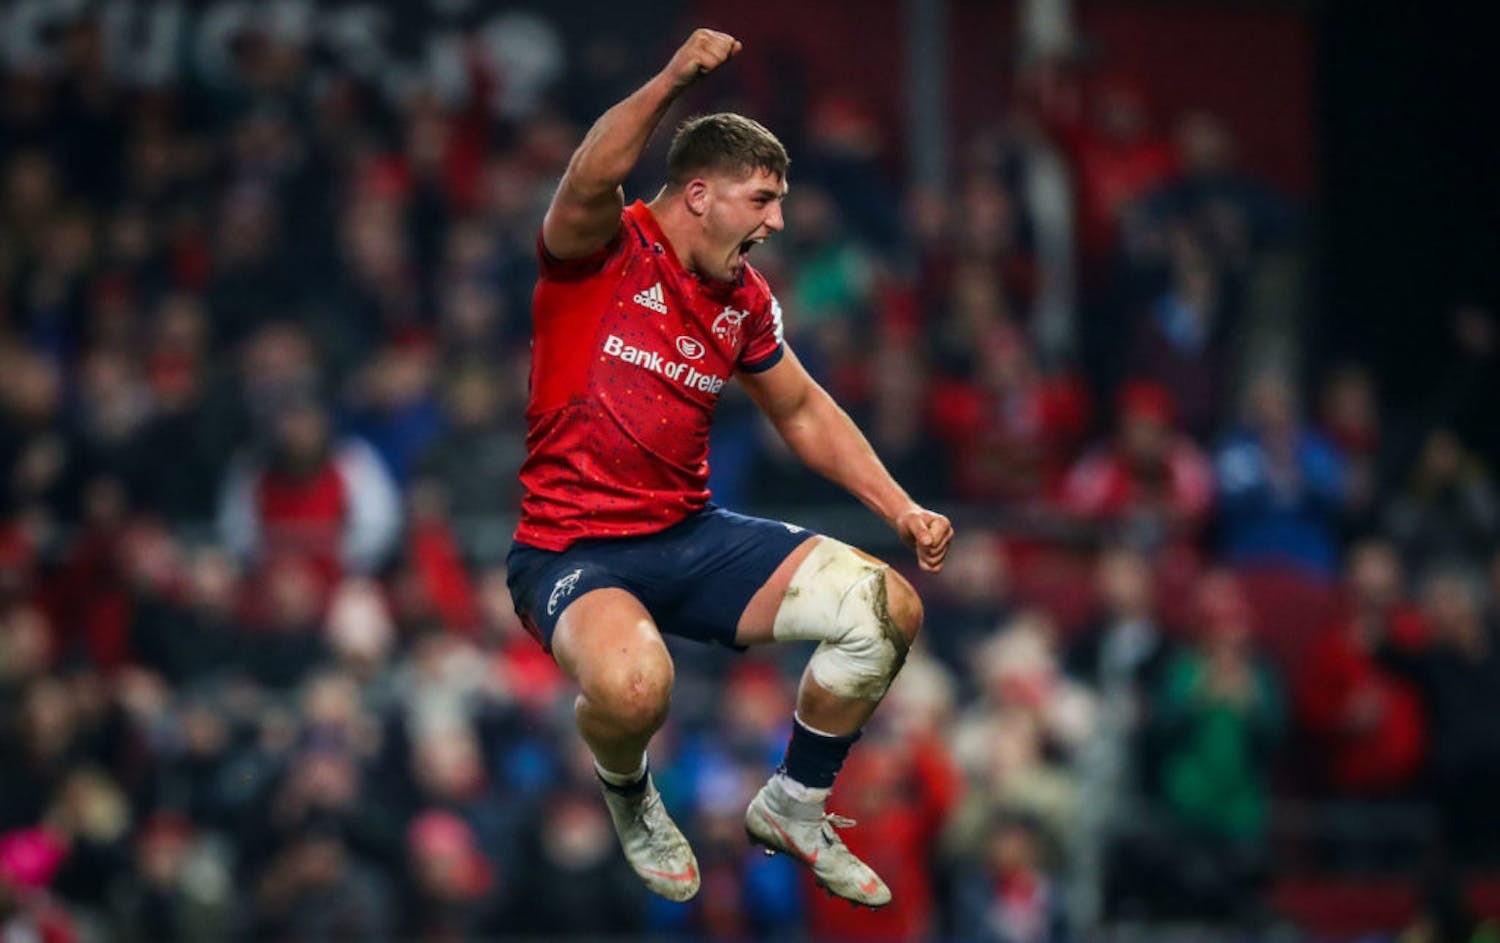 MNR | Munster's game changers and Ulster await Leinster